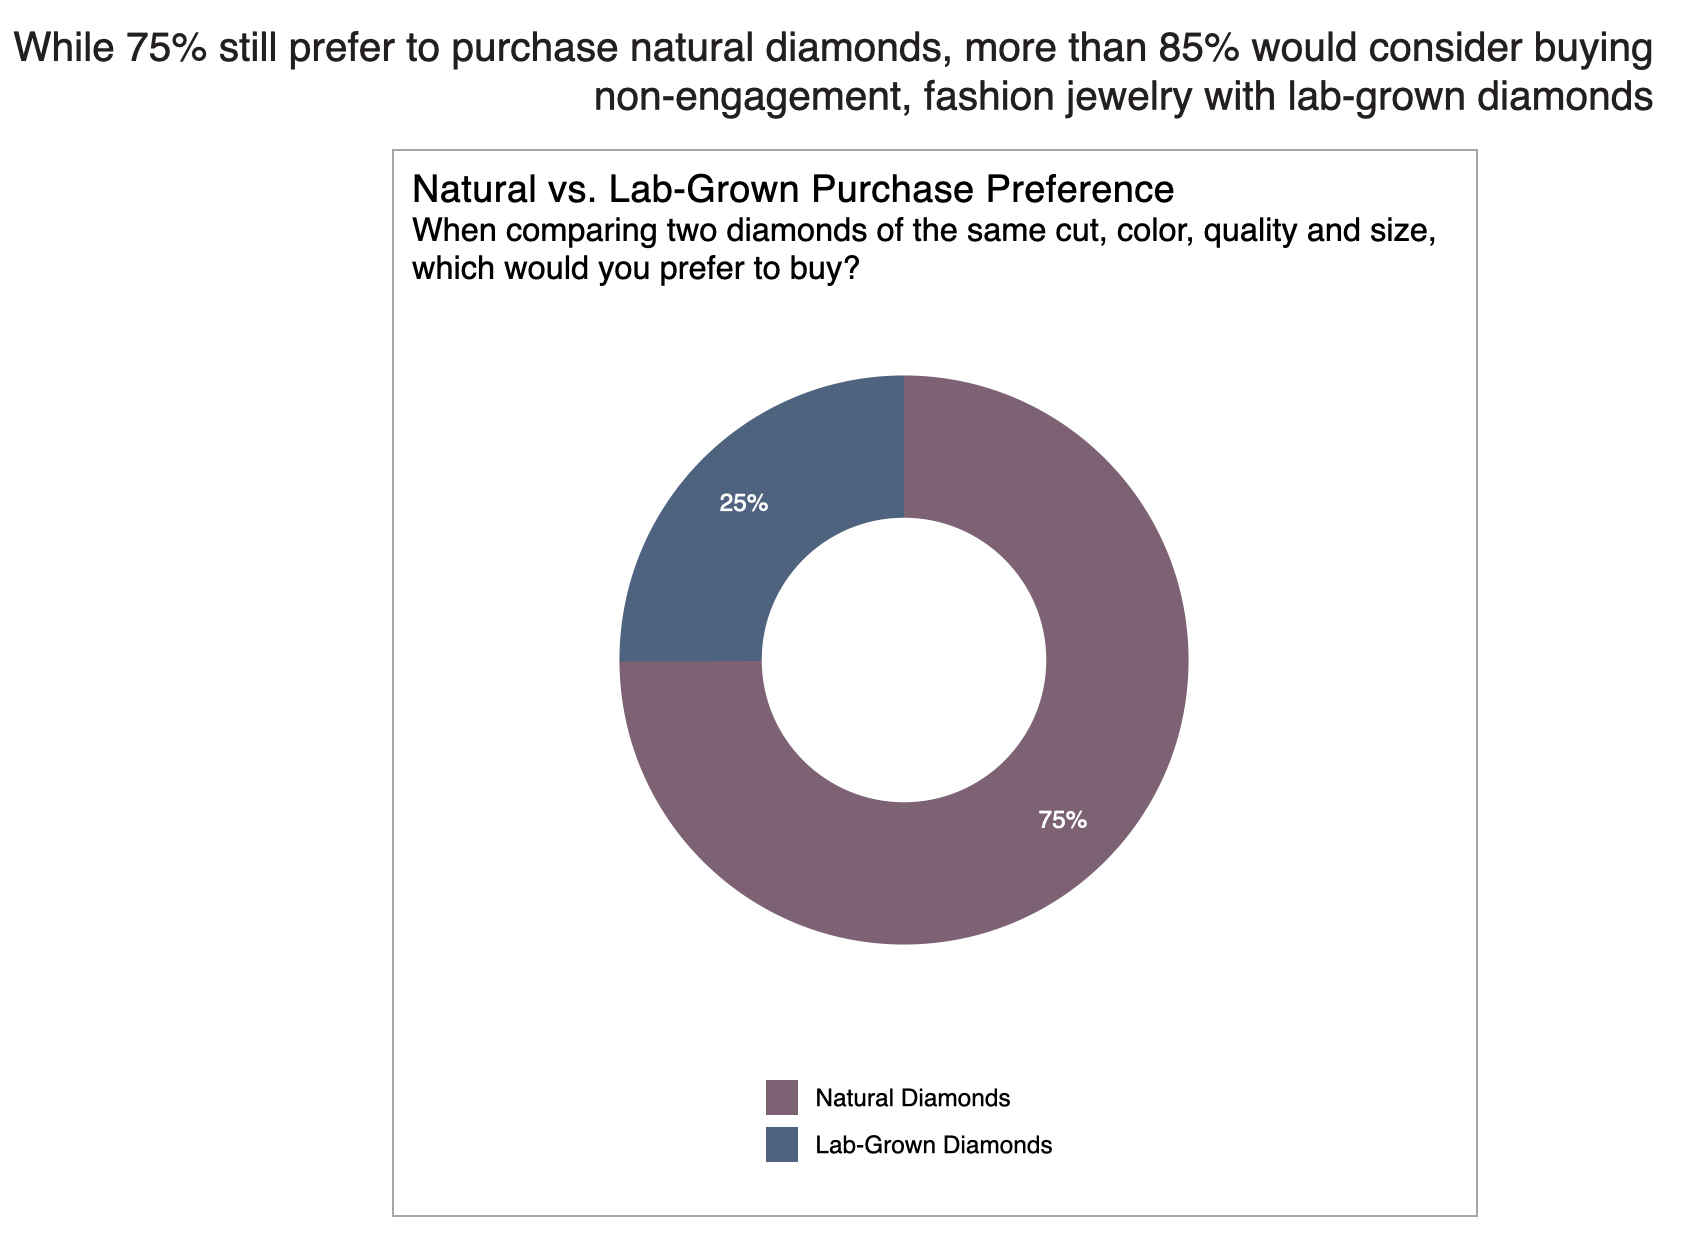 Research Reveals Opportunities for Both Natural and Lab-Grown Diamonds